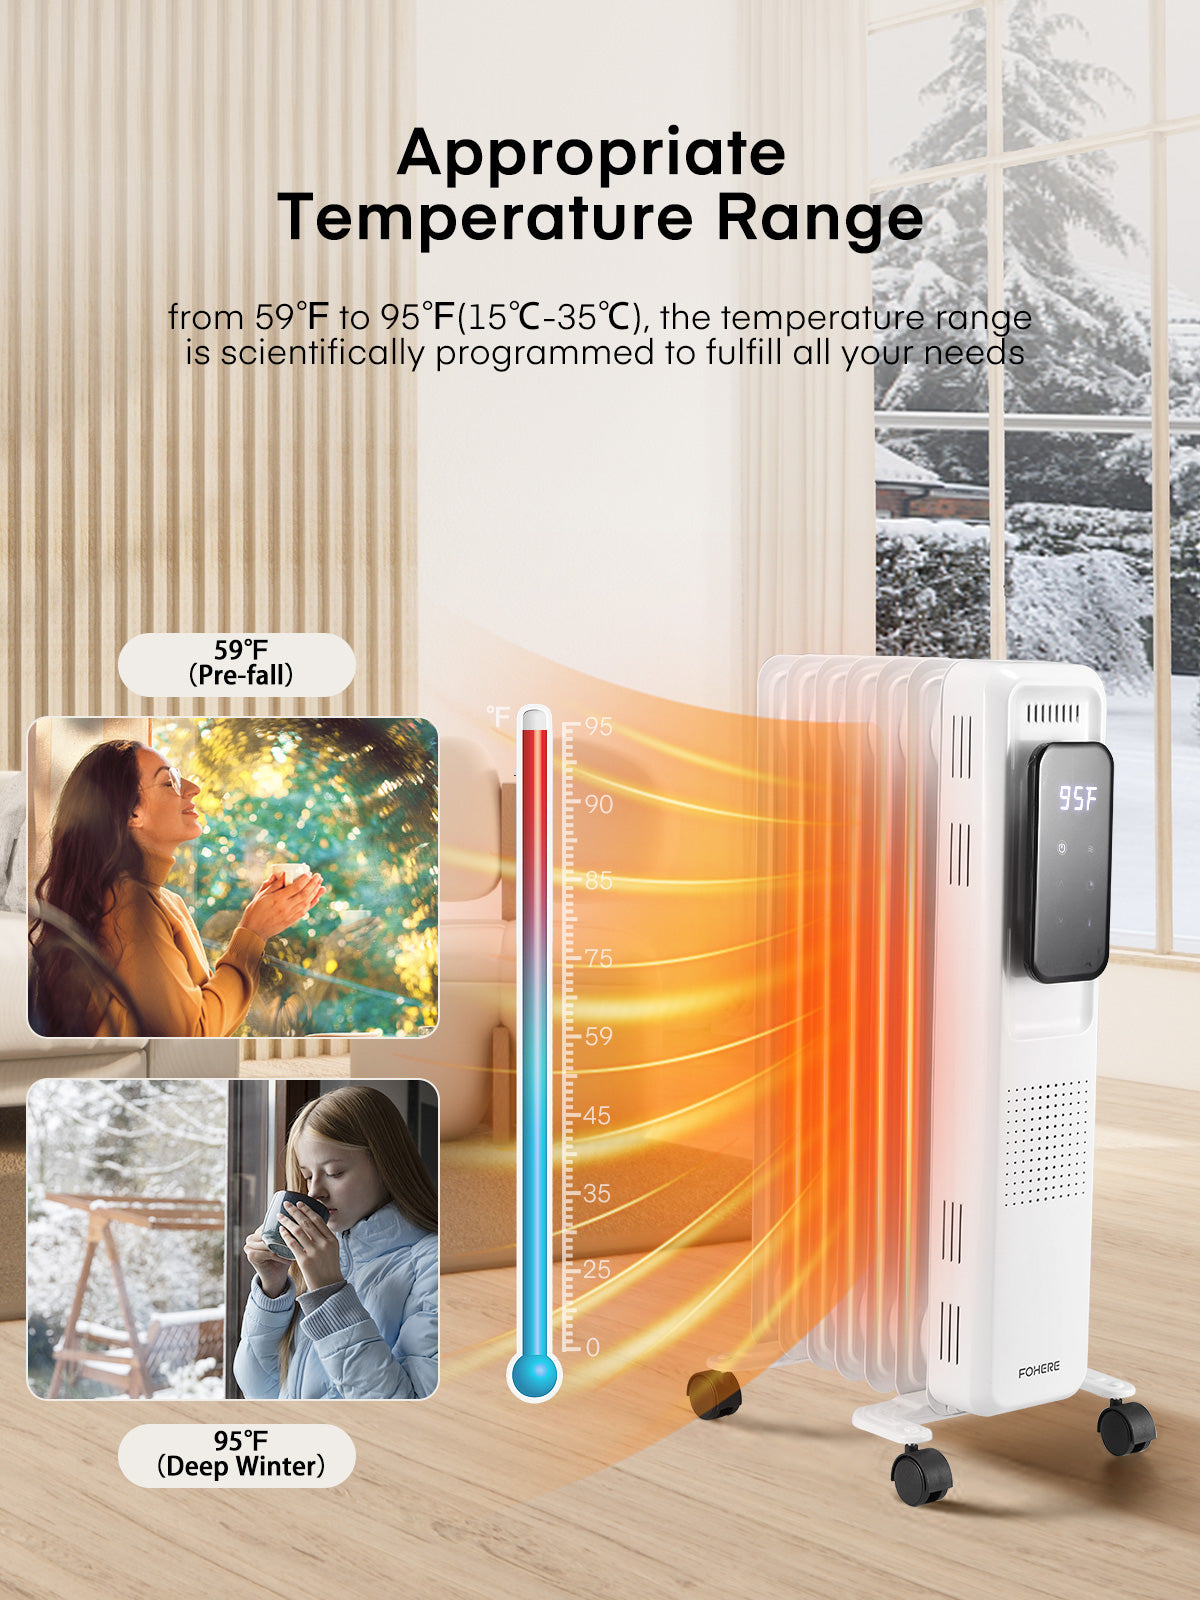 FOHERE Radiator Heater, Upgraded 1500W Electric Portable Space Oil Filled Heater with Remote Control, 4 Modes, Overheat & Tip-Over Protection, 24h Timer, Digital Thermostat, Quiet, Indoor